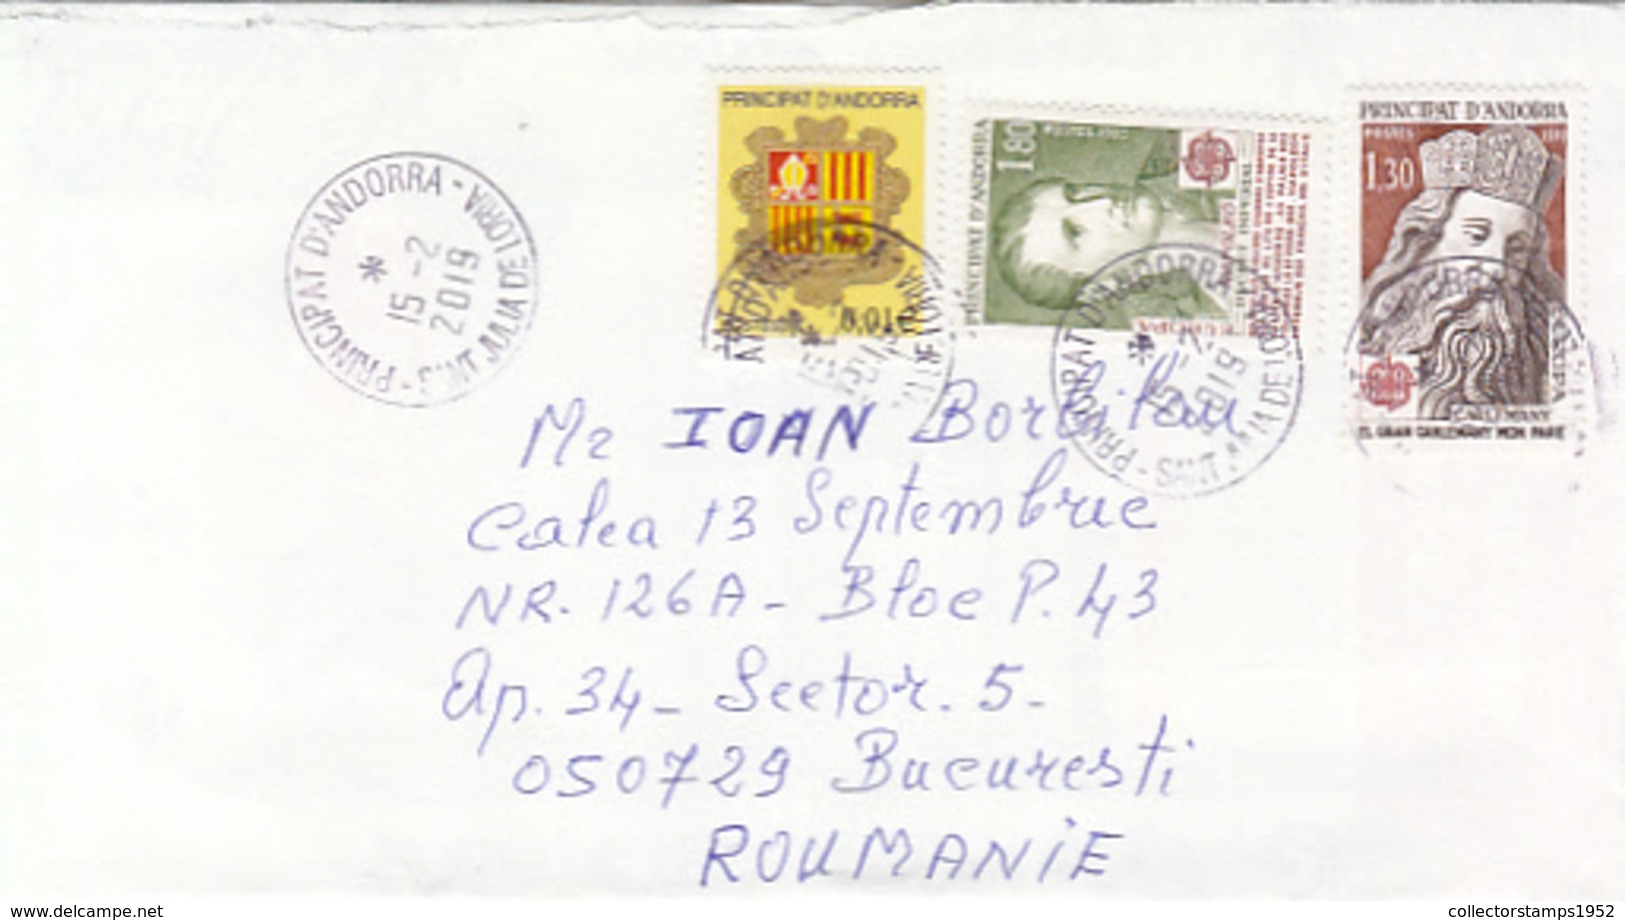 89699- COAT OF ARMS, PERSONALITIES, STAMPS ON COVER, 2019, FRENCH ANDORRA - Covers & Documents